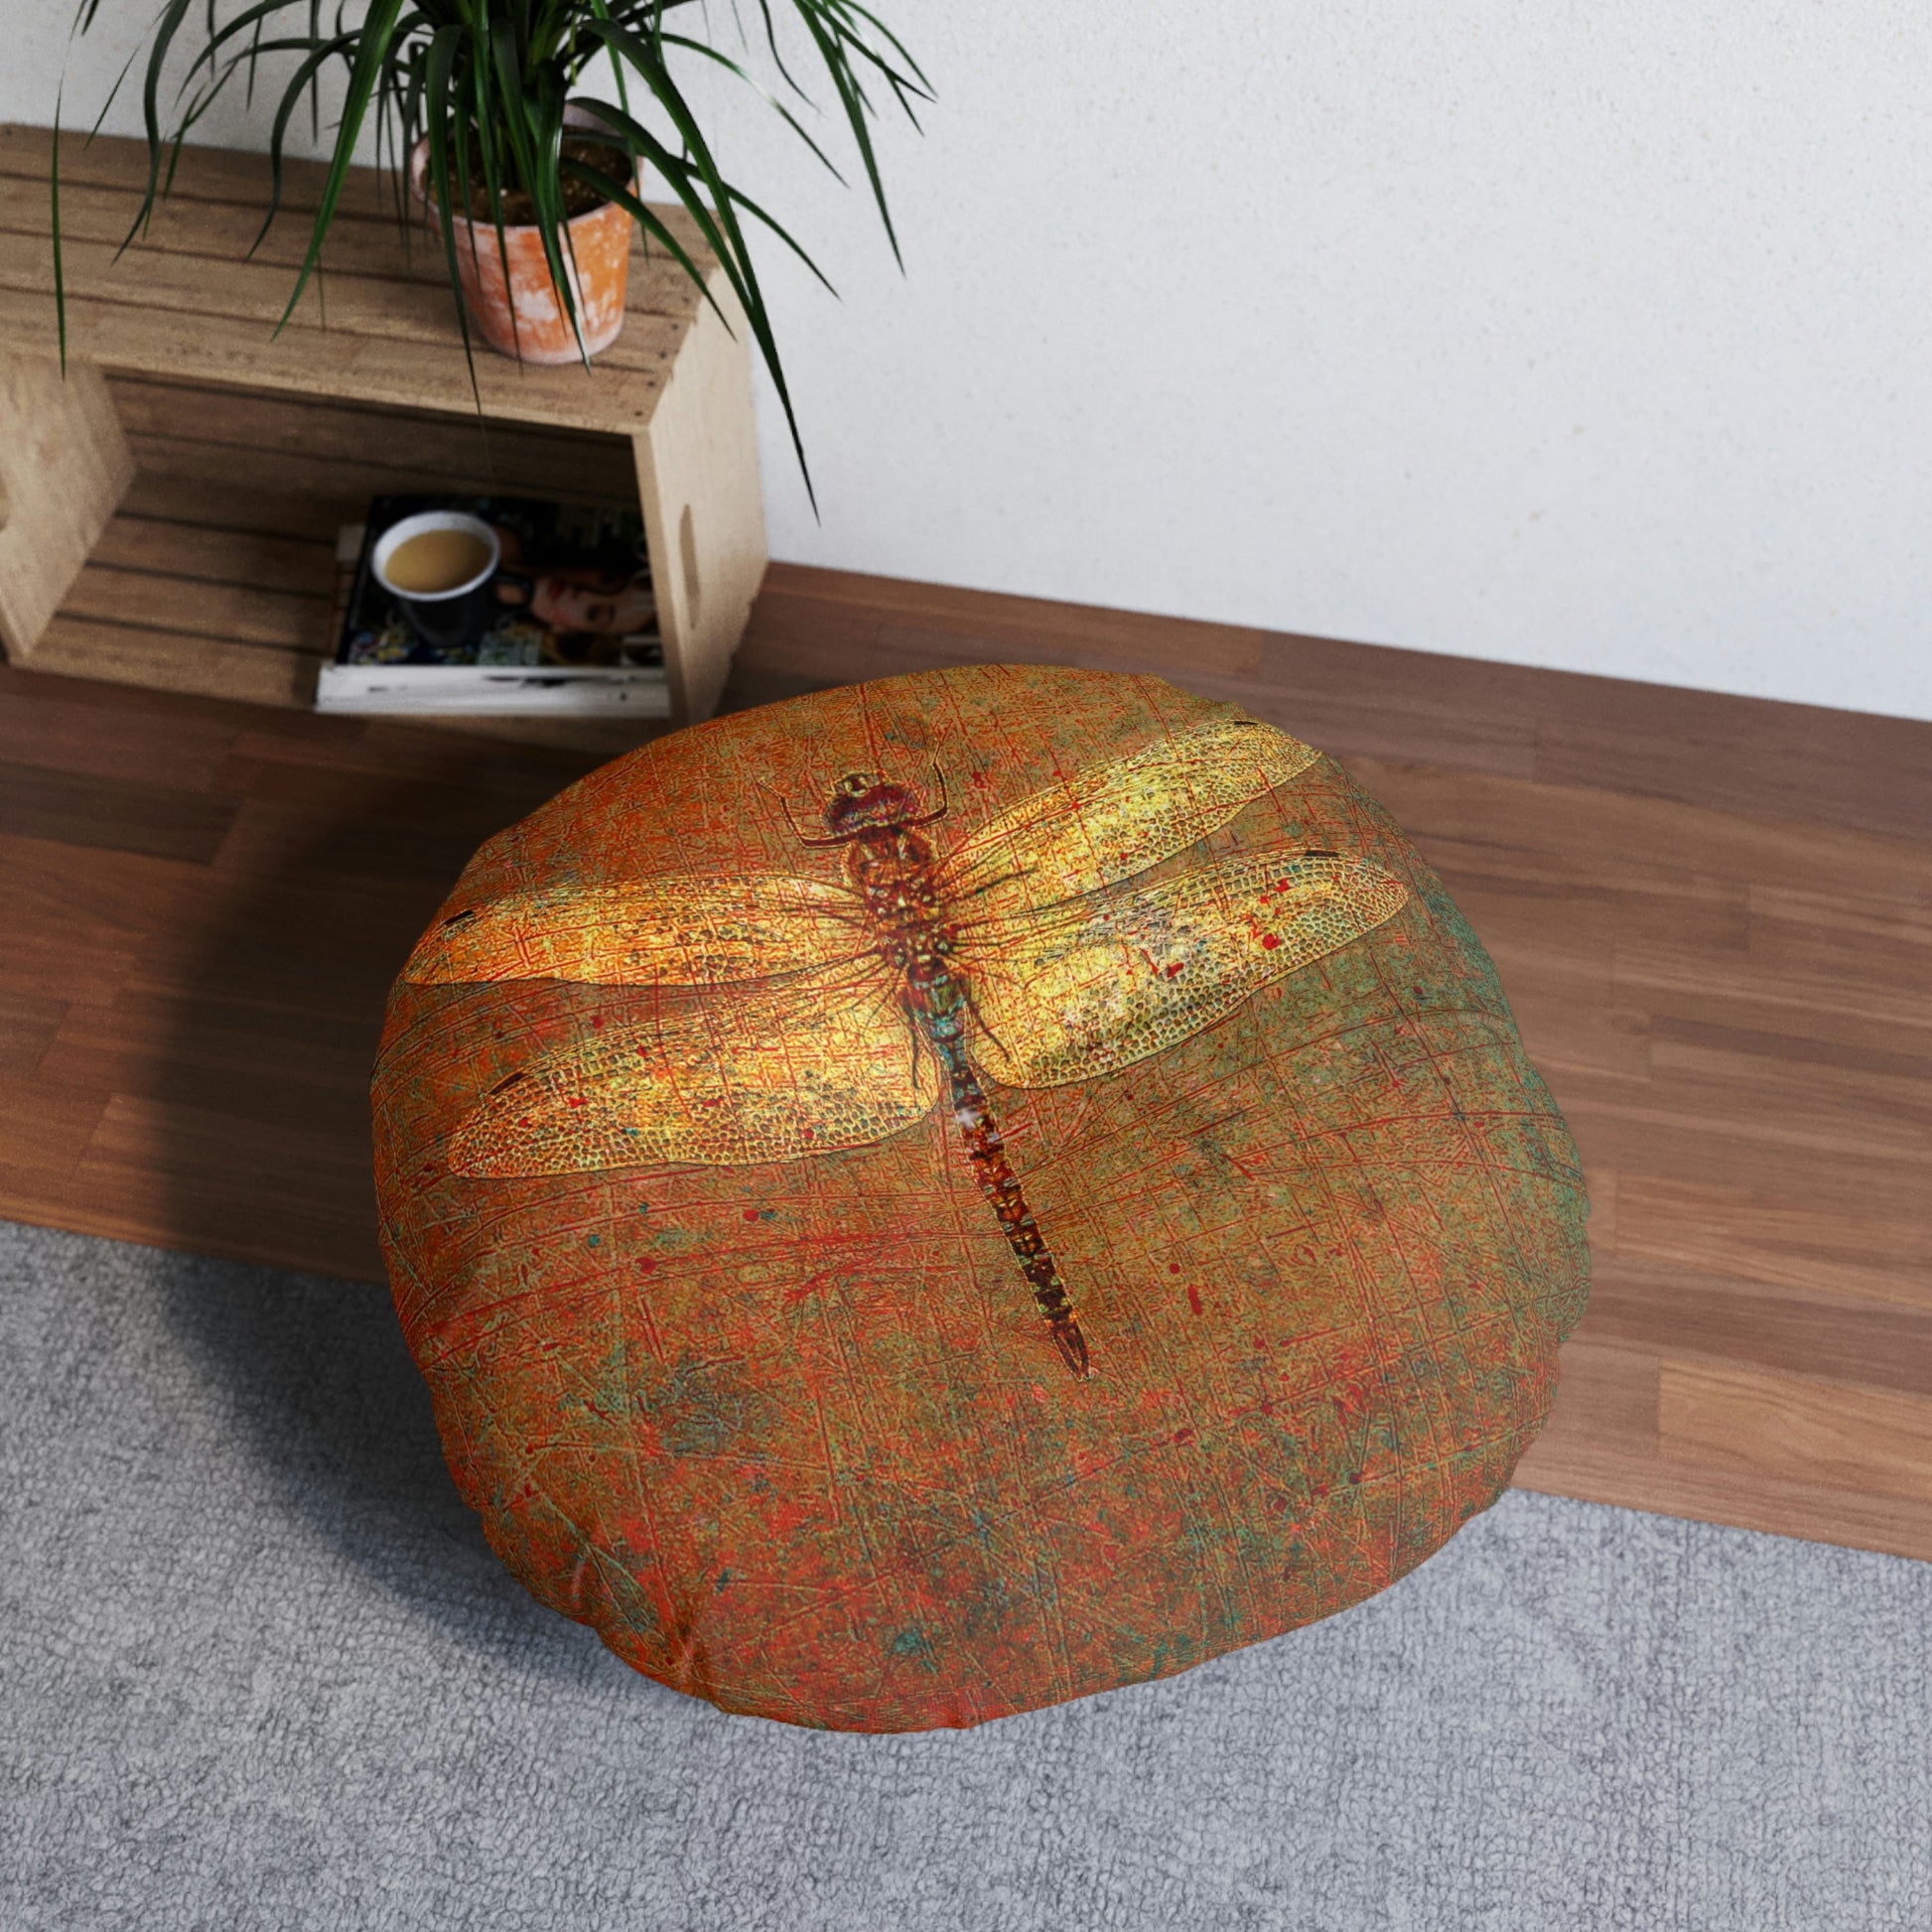 Dragonfly on Brown Stone Background Print on 2 Sided Round Tufted Floor Pillow front side on floor